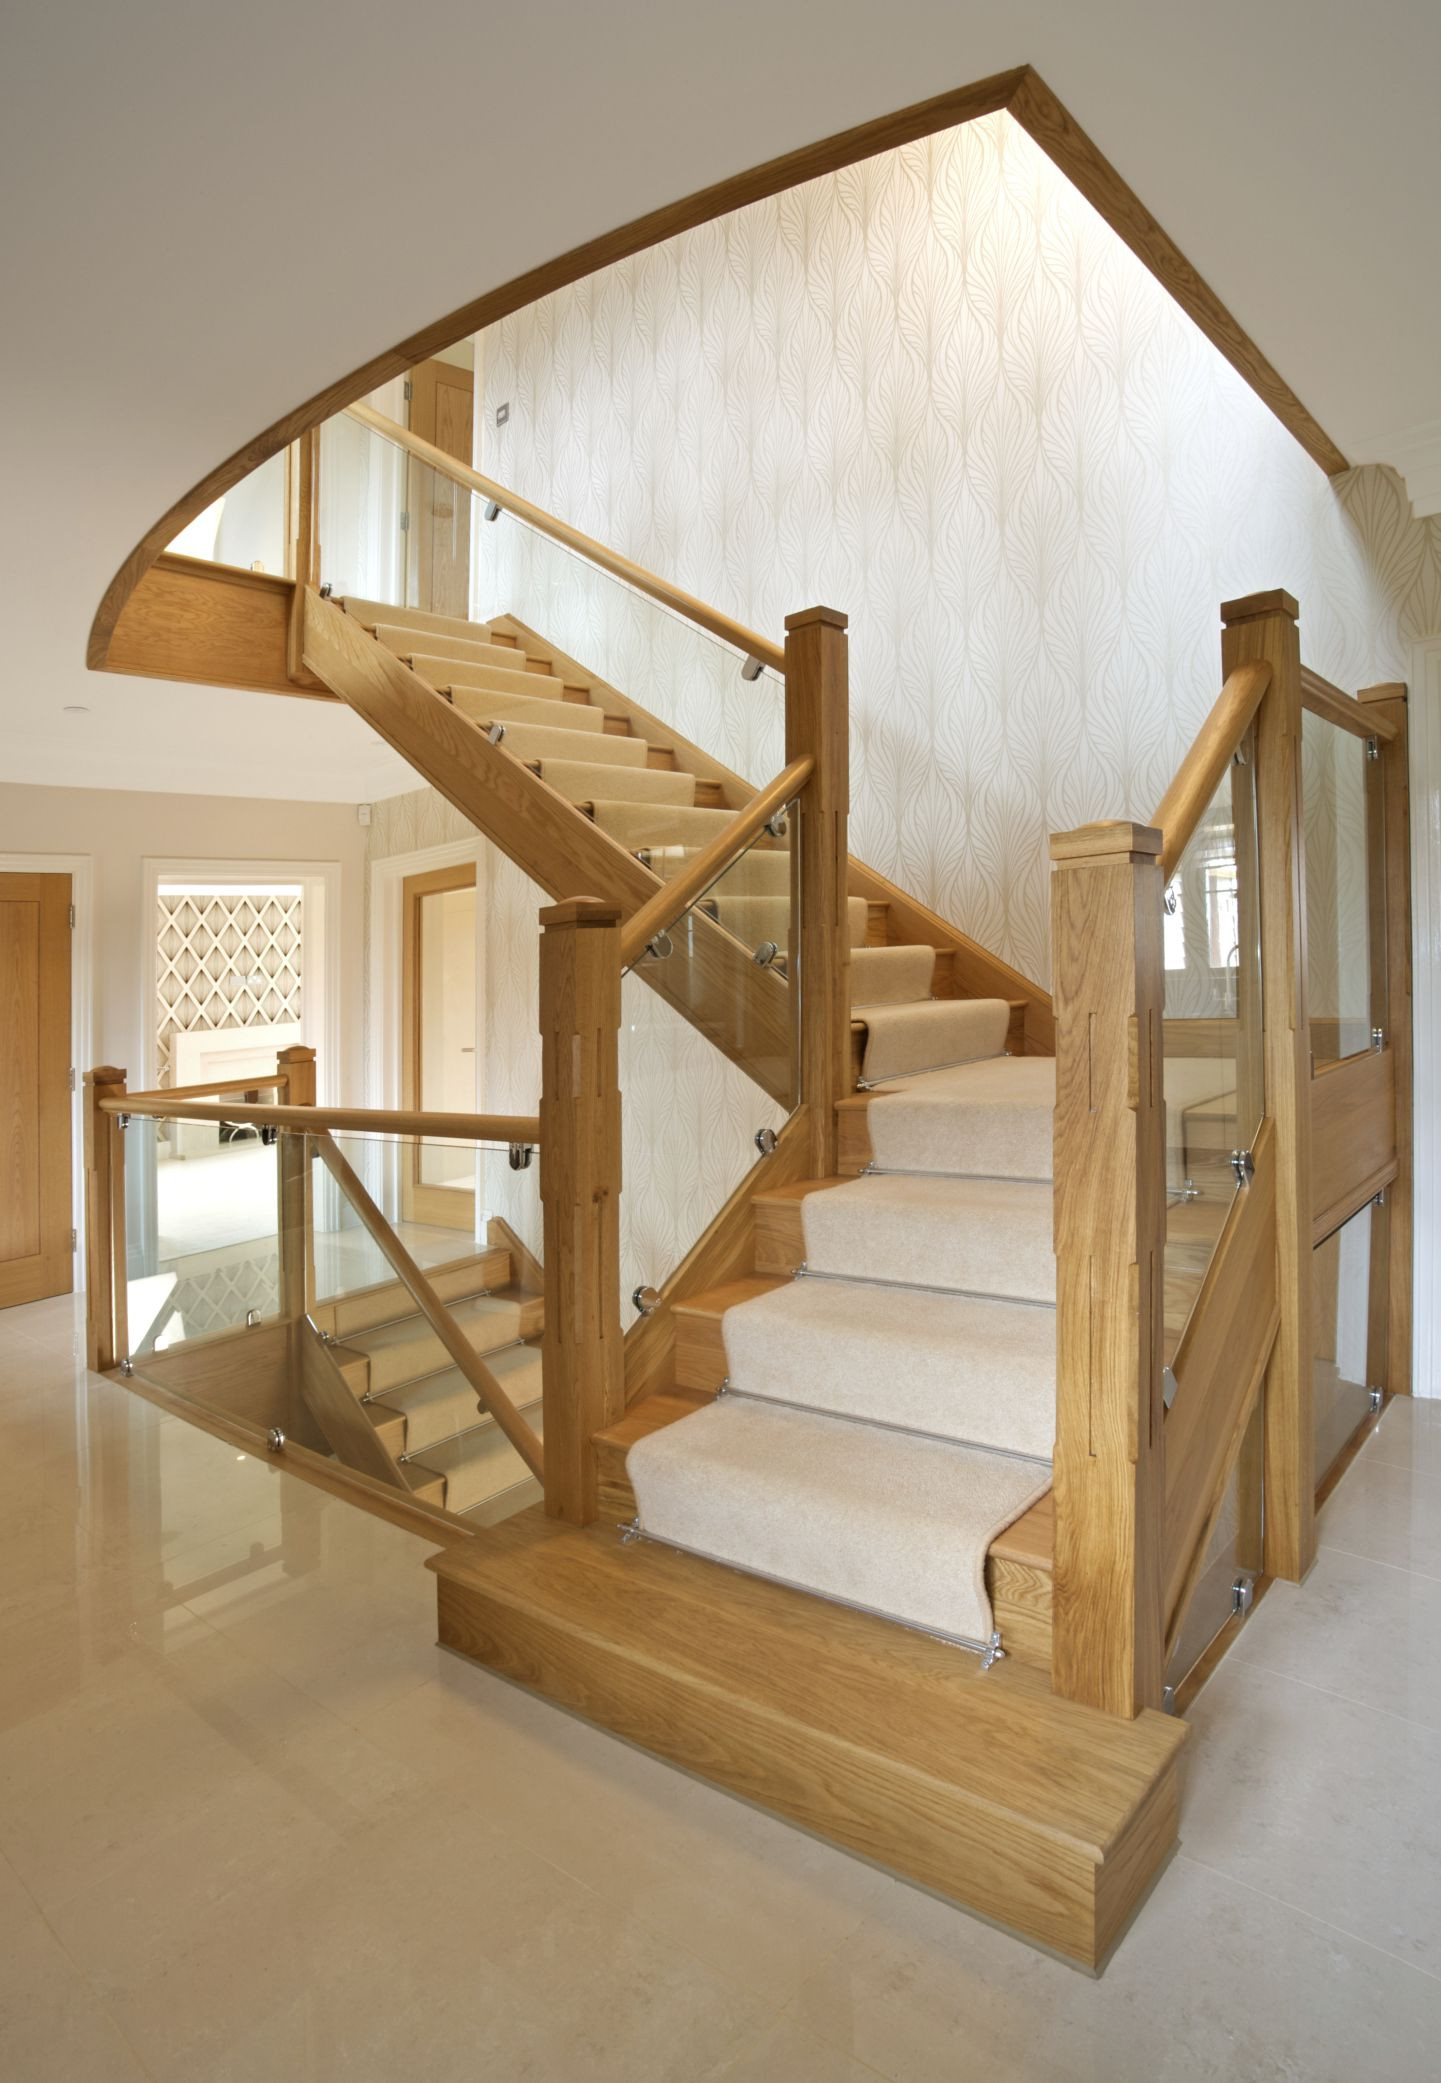 hardwood floor stairs slippery of patterned carpet with recessed lighting with regard to modern stair runner on light wood 56a8124c5f9b58b7d0f063c7